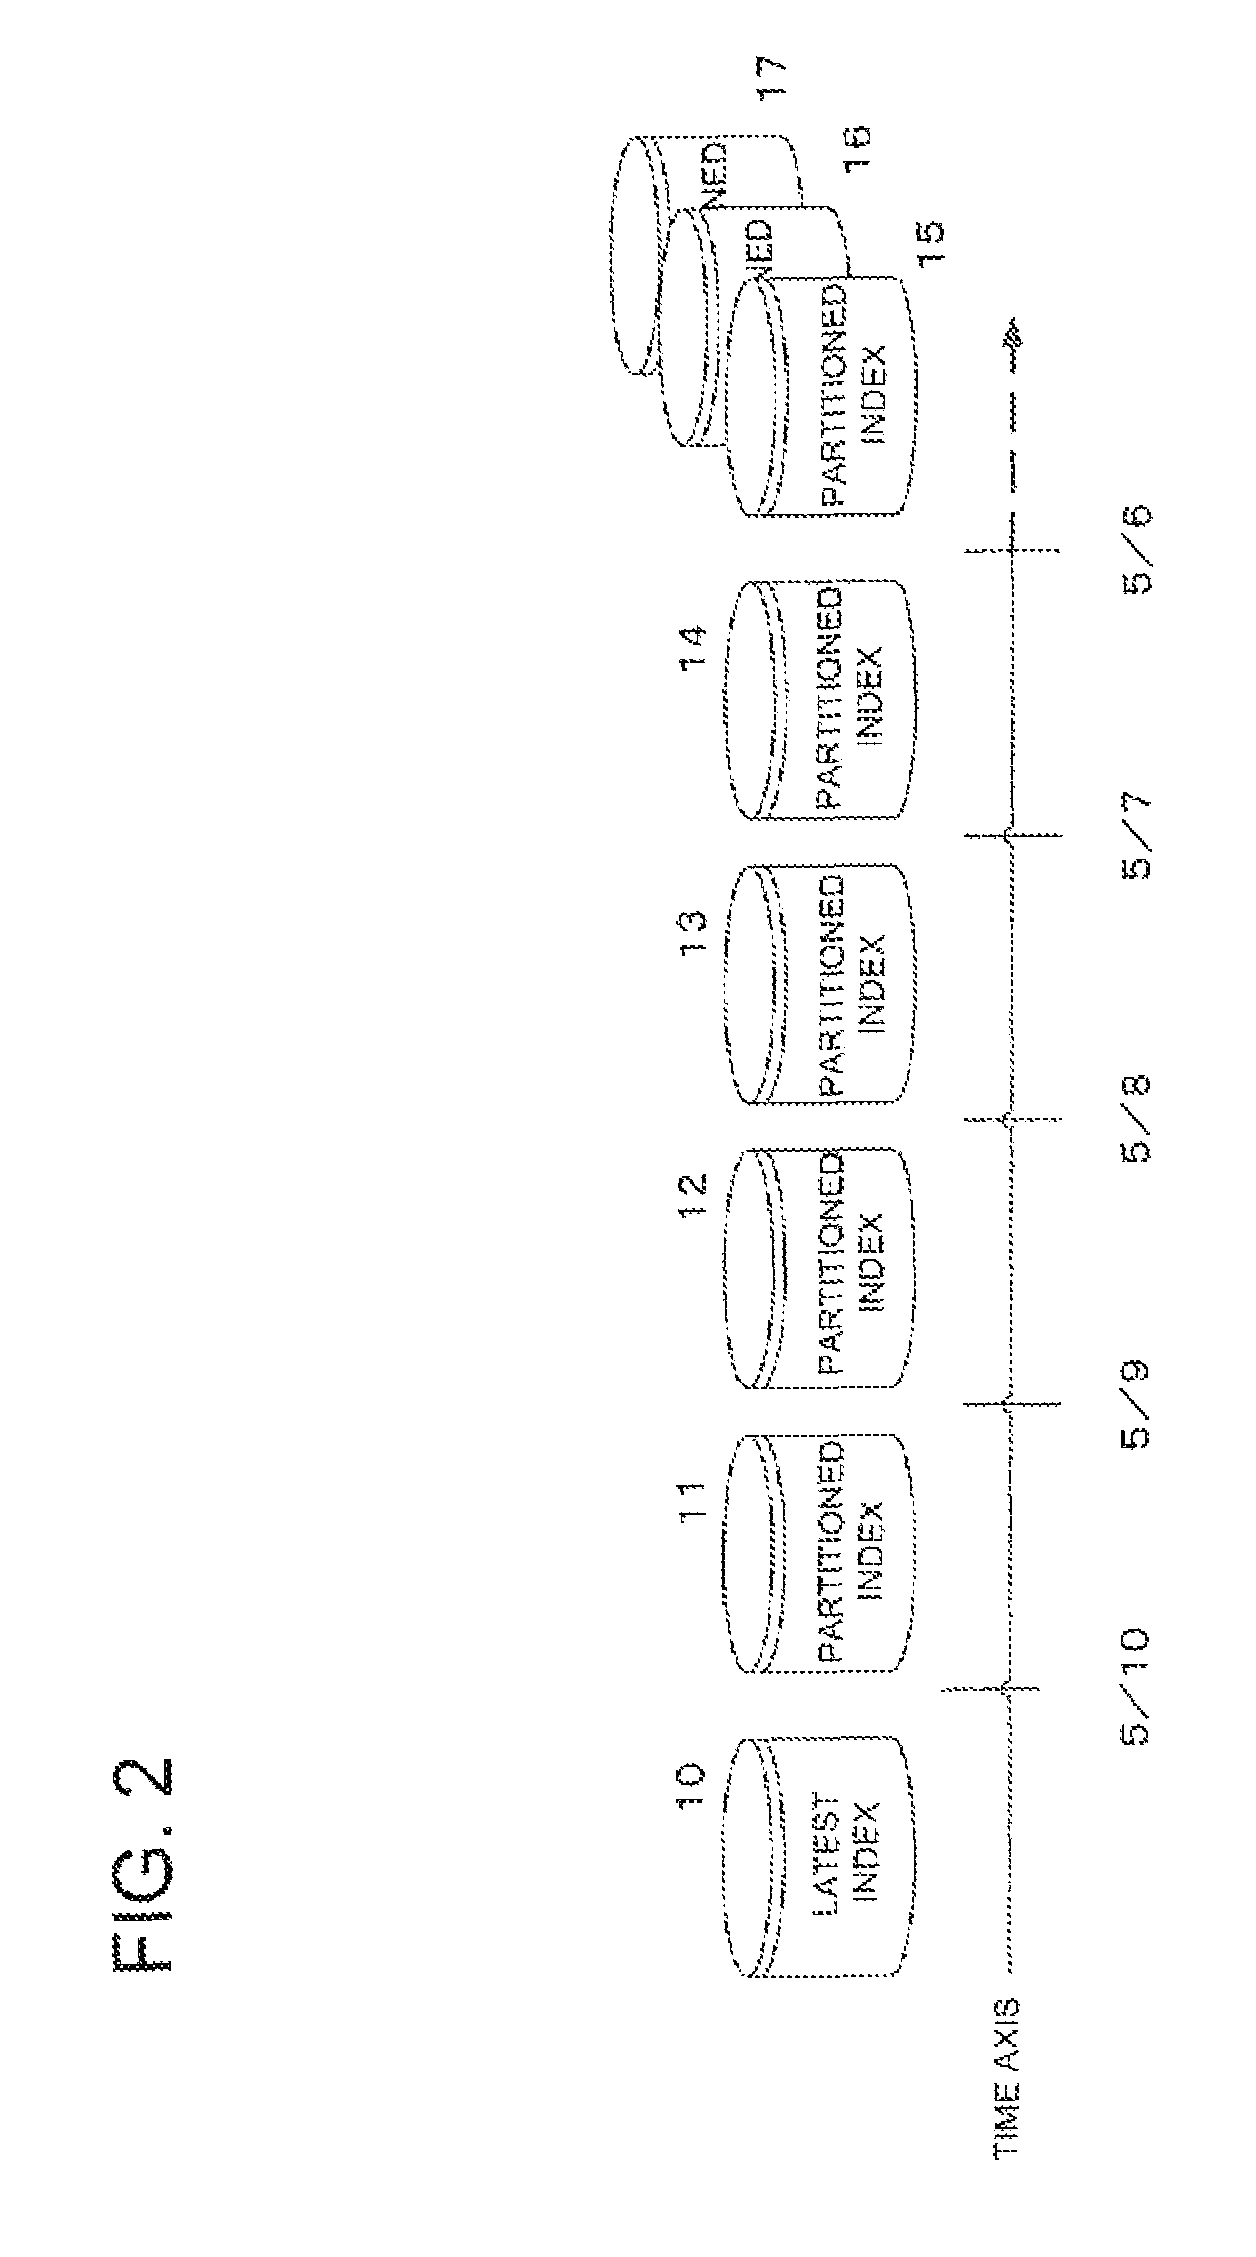 Information document search system, method and program for partitioned indexes on a time series in association with a backup document storage